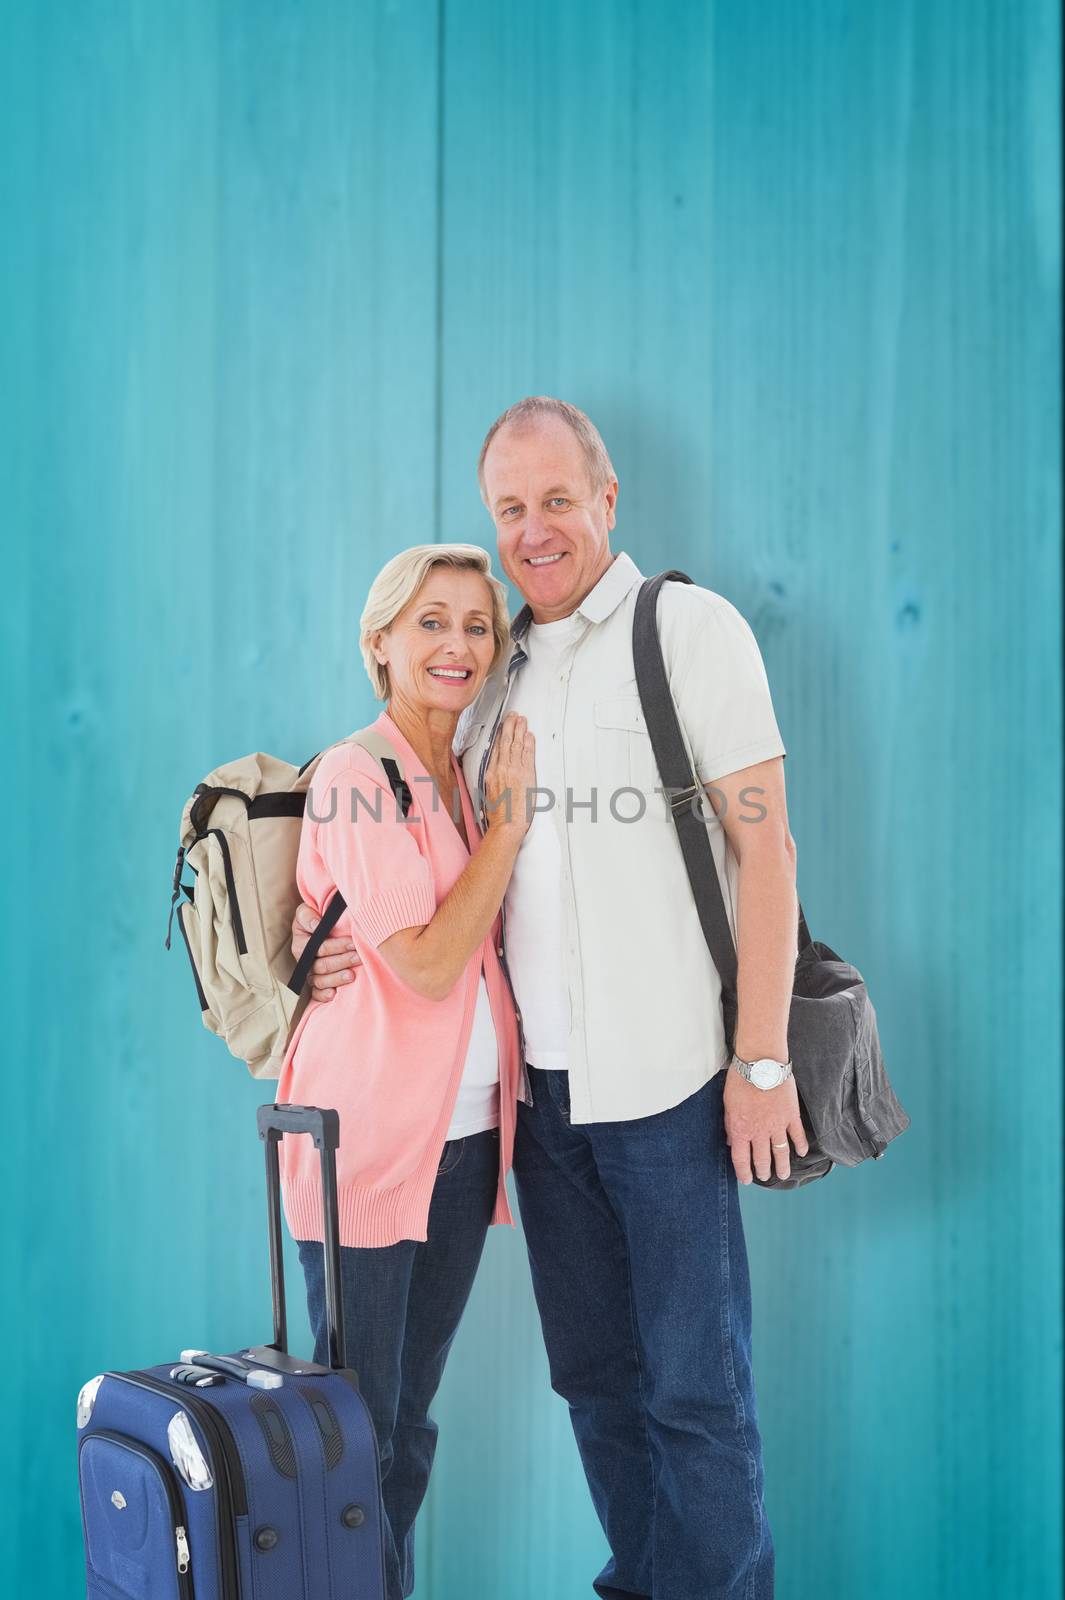 Composite image of smiling older couple going on their holidays by Wavebreakmedia